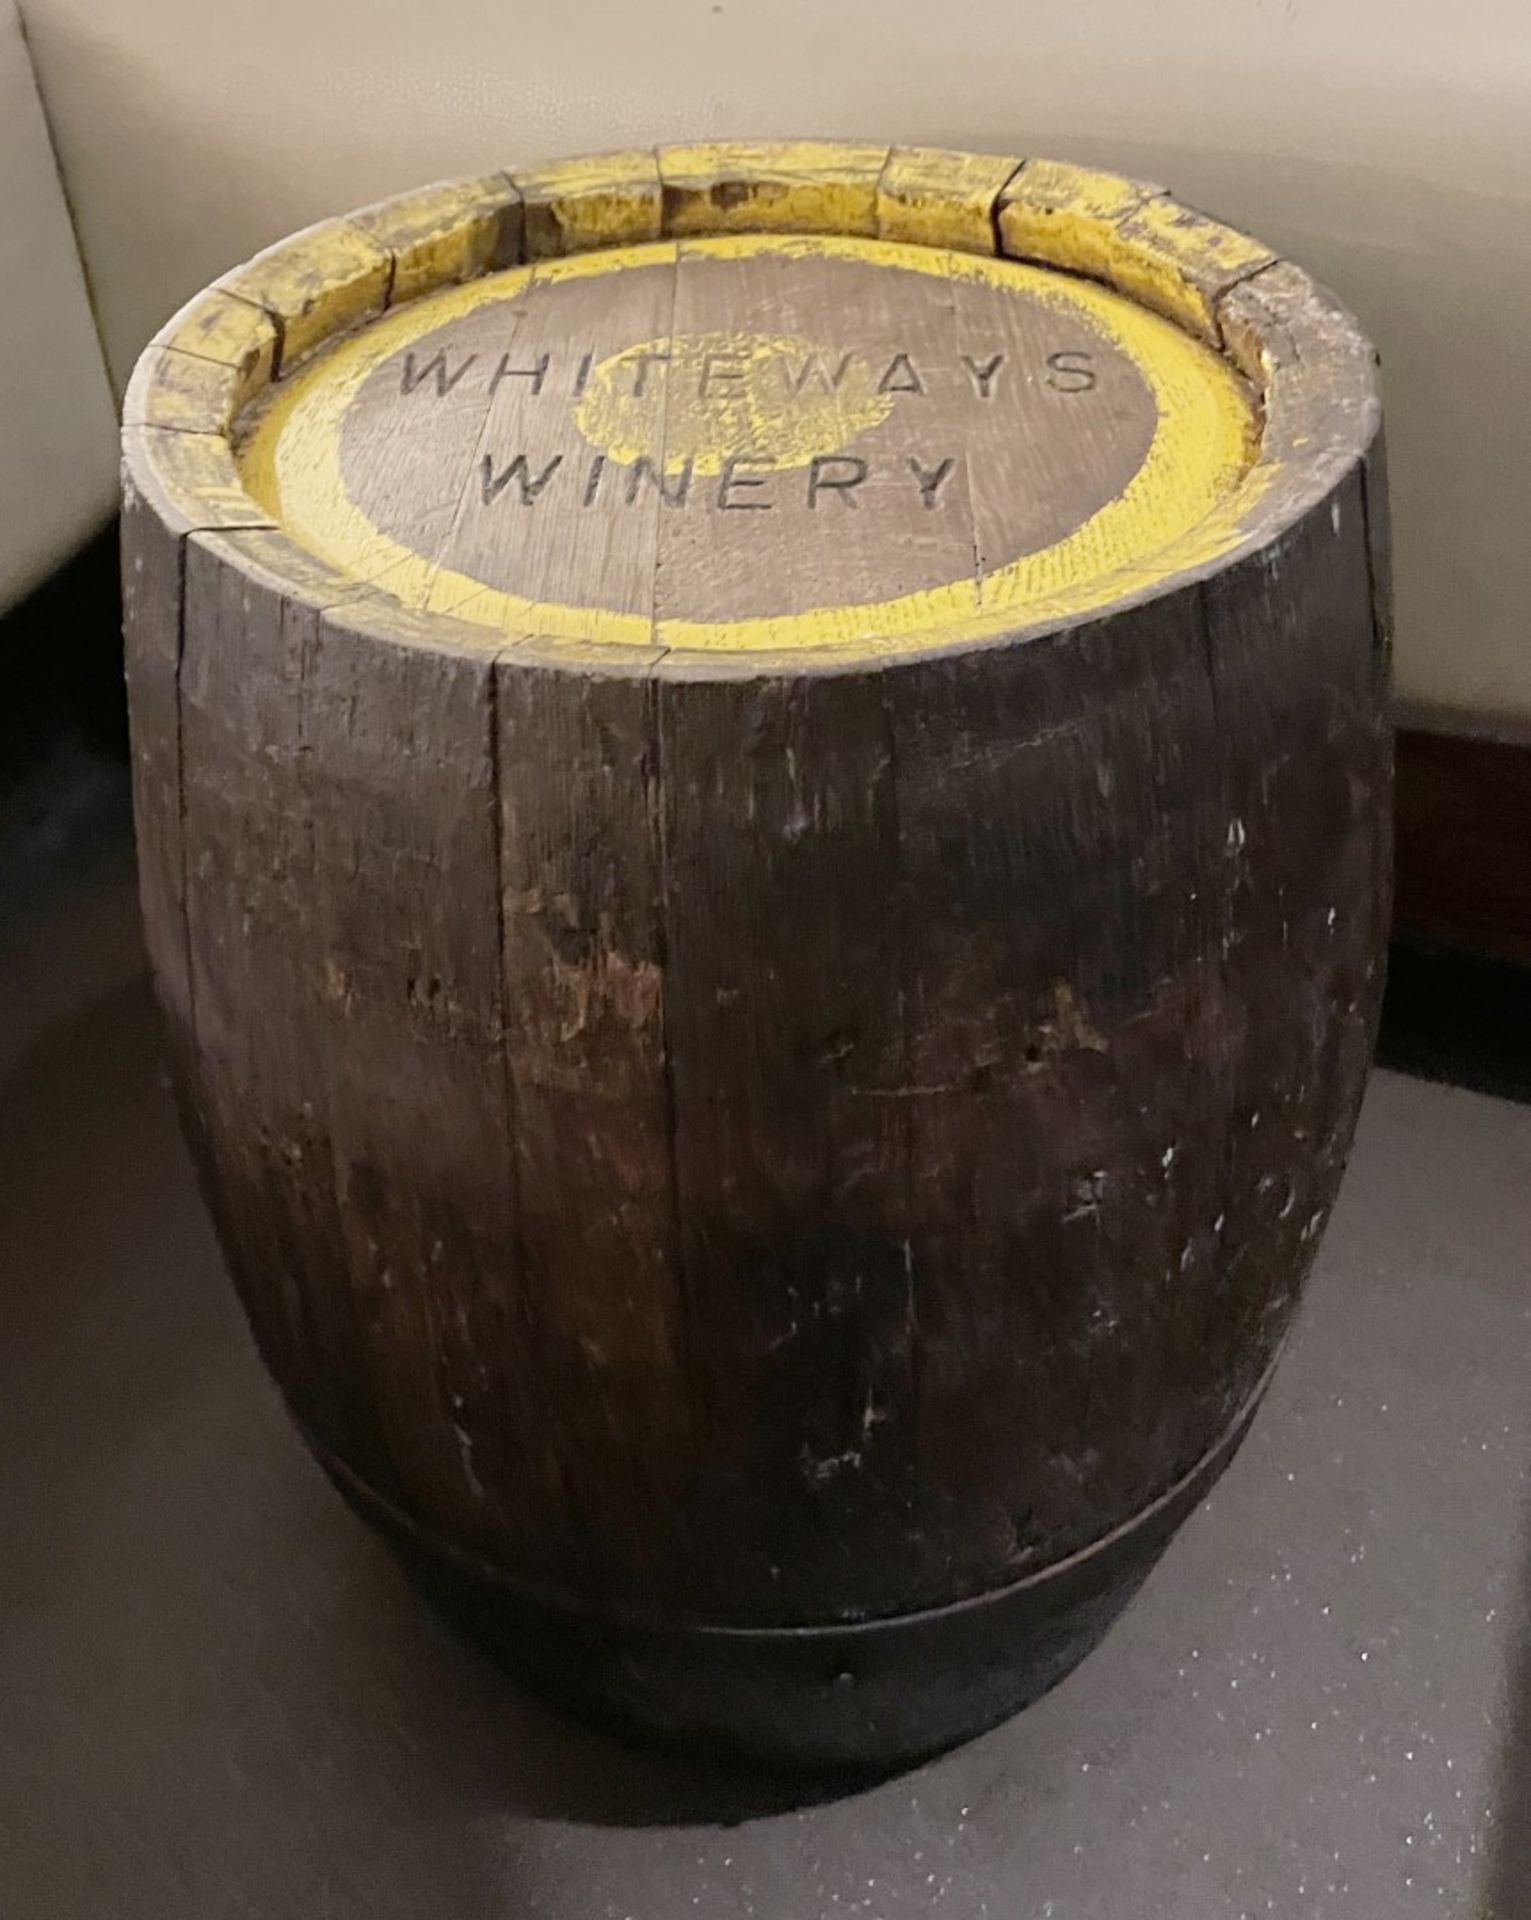 2 x Original Whiteways Winery Branded Barrels and Wooden Coffee Table - Ref: 118 - Image 5 of 7